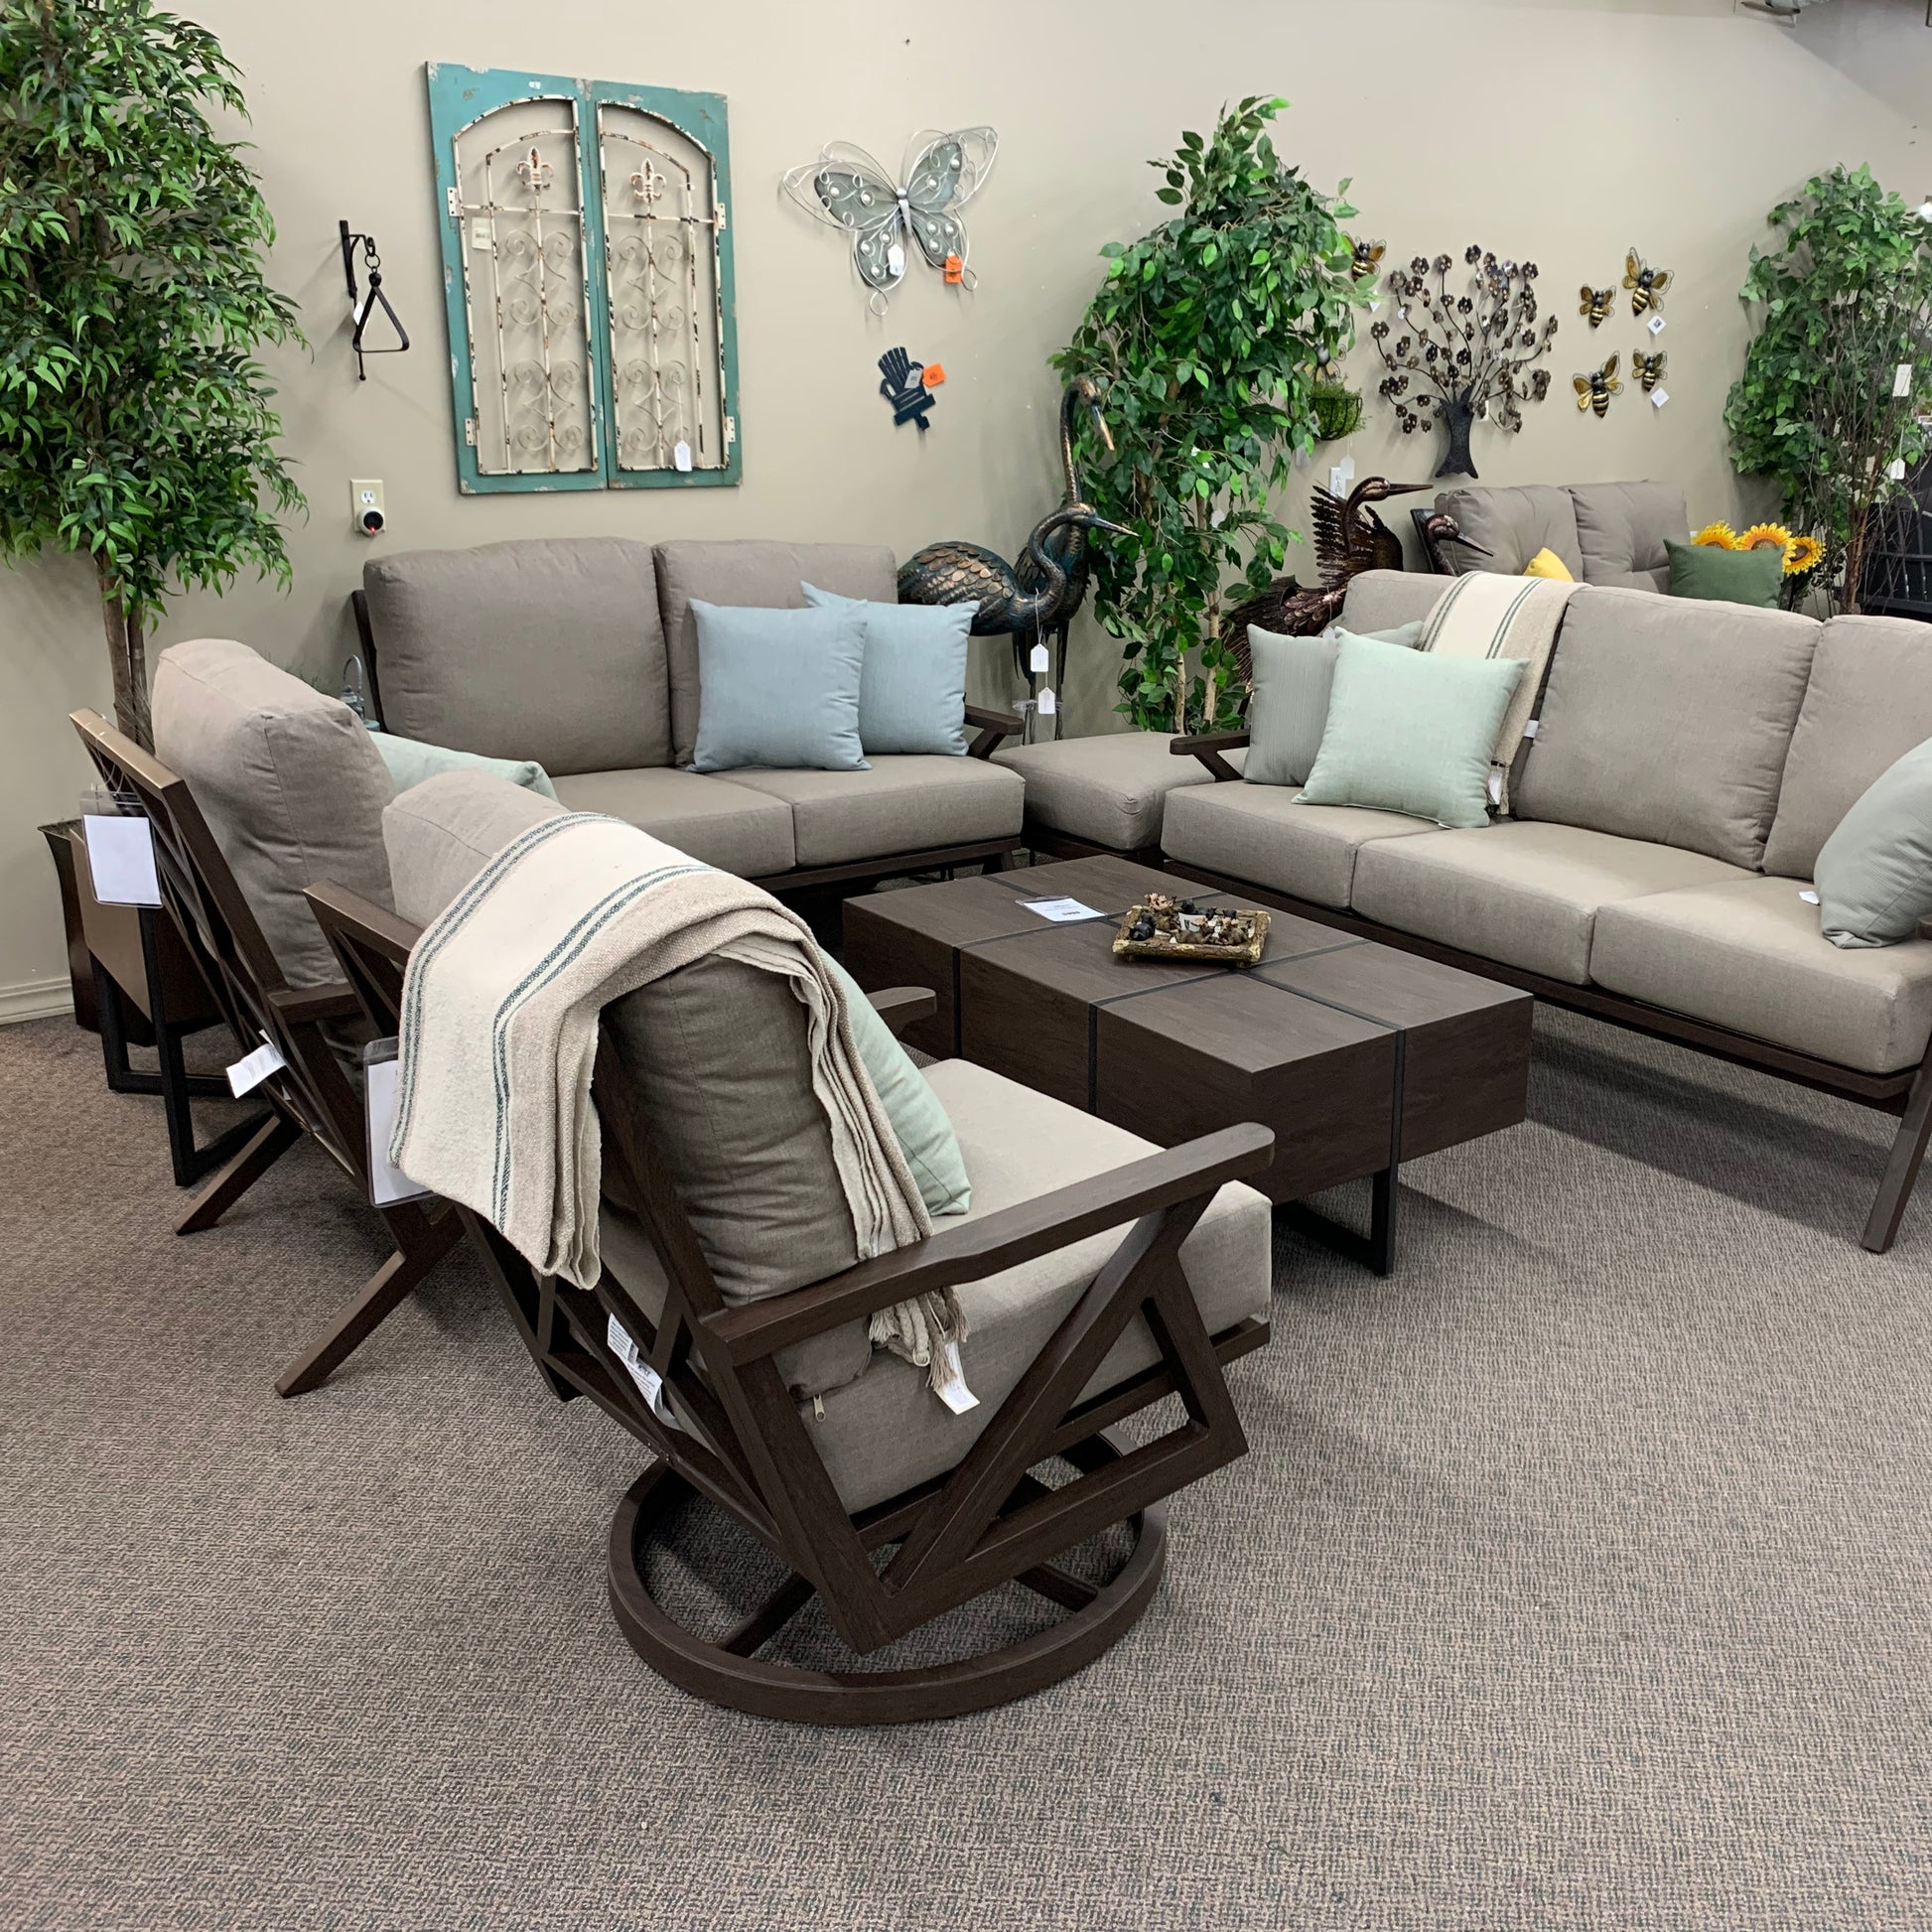 Shop Local Spokane Valley, WA for the best outdoor patio loveseats from Patio Renaissance available at Jacobs Custom Living in Spokane Valley, WA 